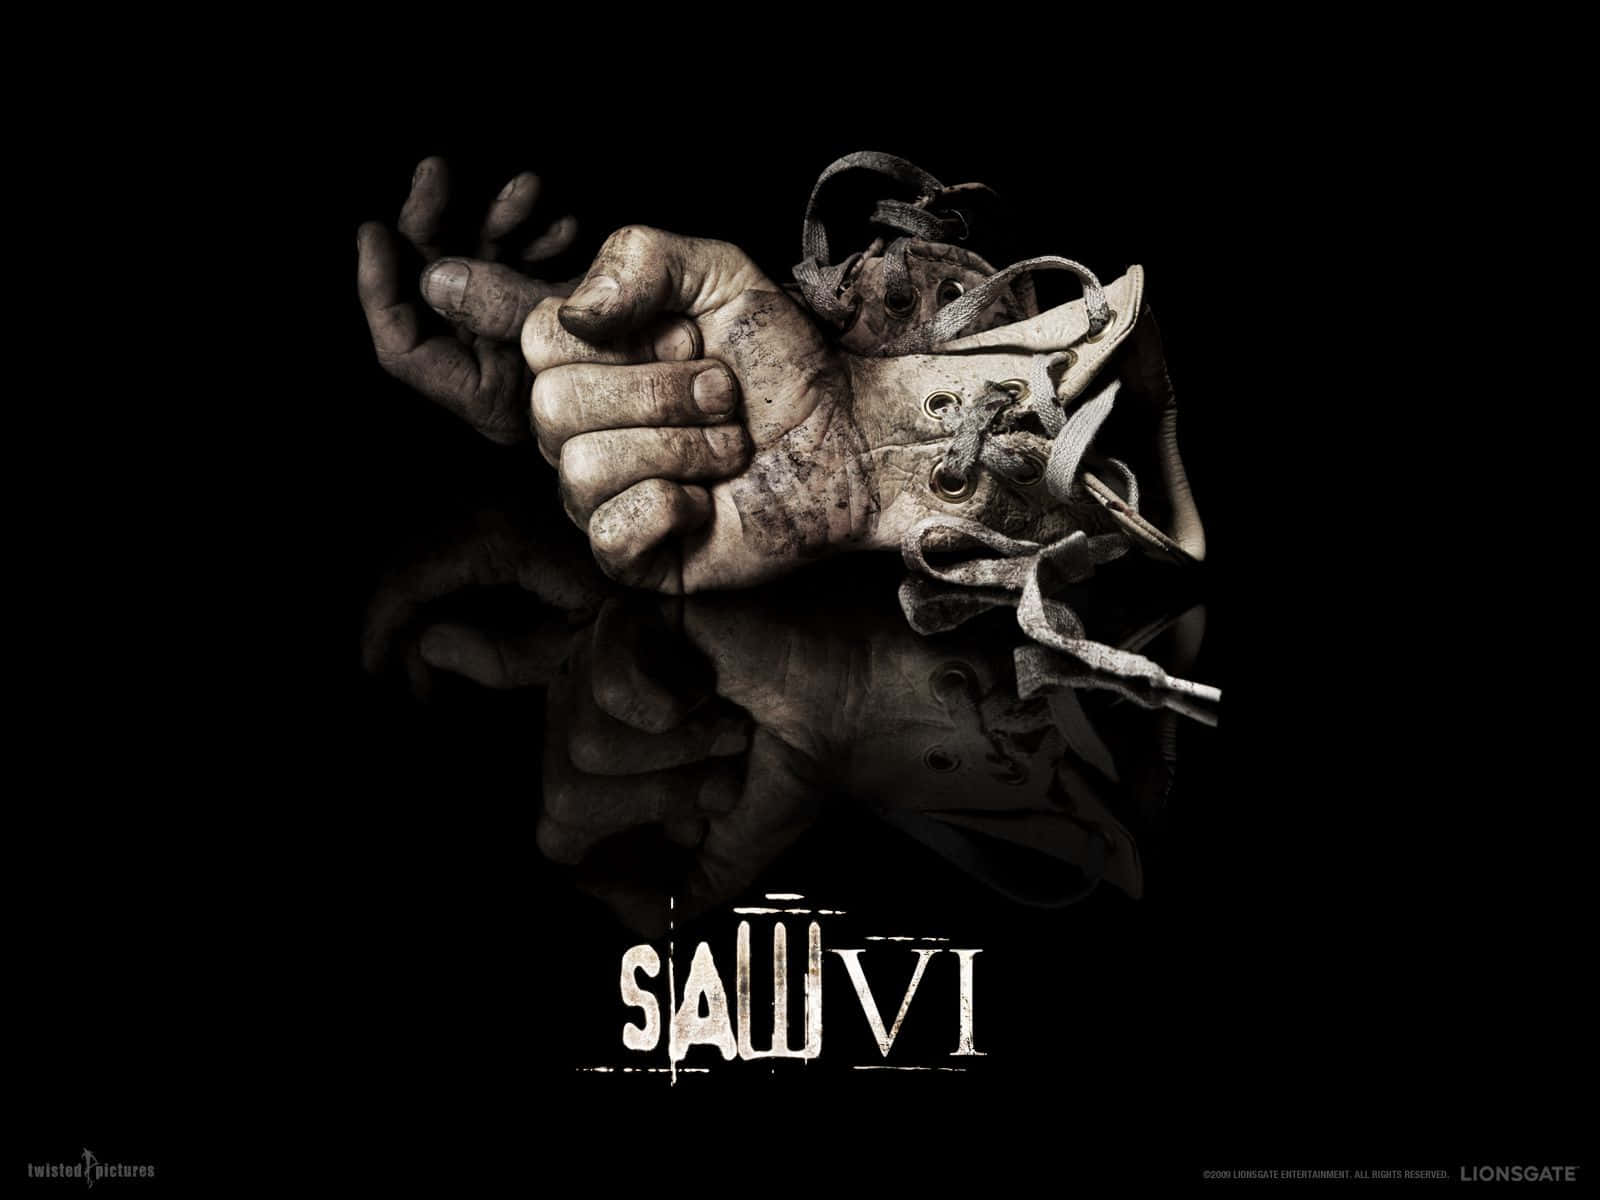 Free Saw Wallpaper Downloads, [100+] Saw Wallpapers for FREE | Wallpapers .com